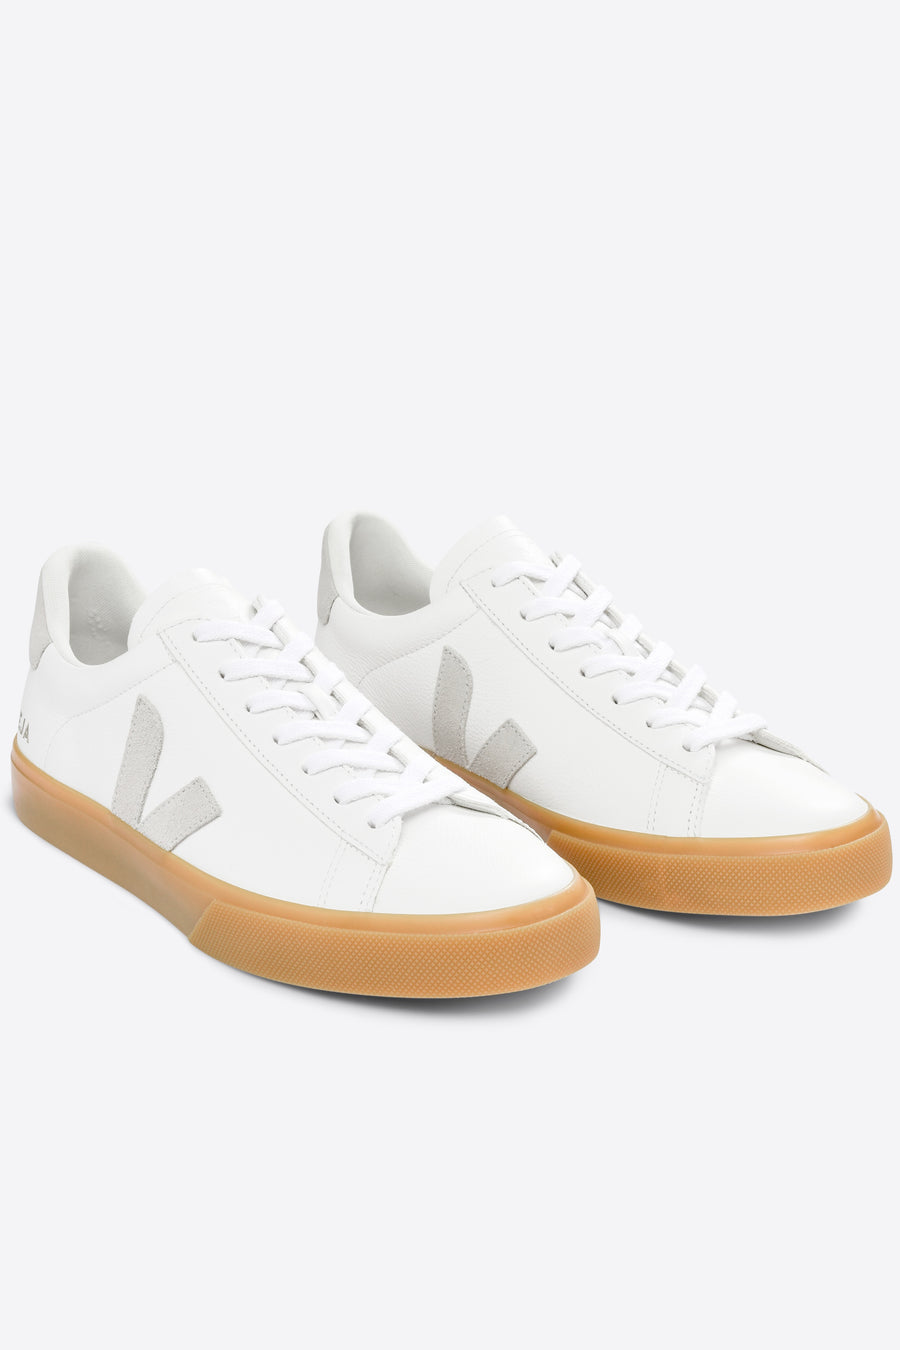 Veja Campo Sneaker - Extra White Natural Natural